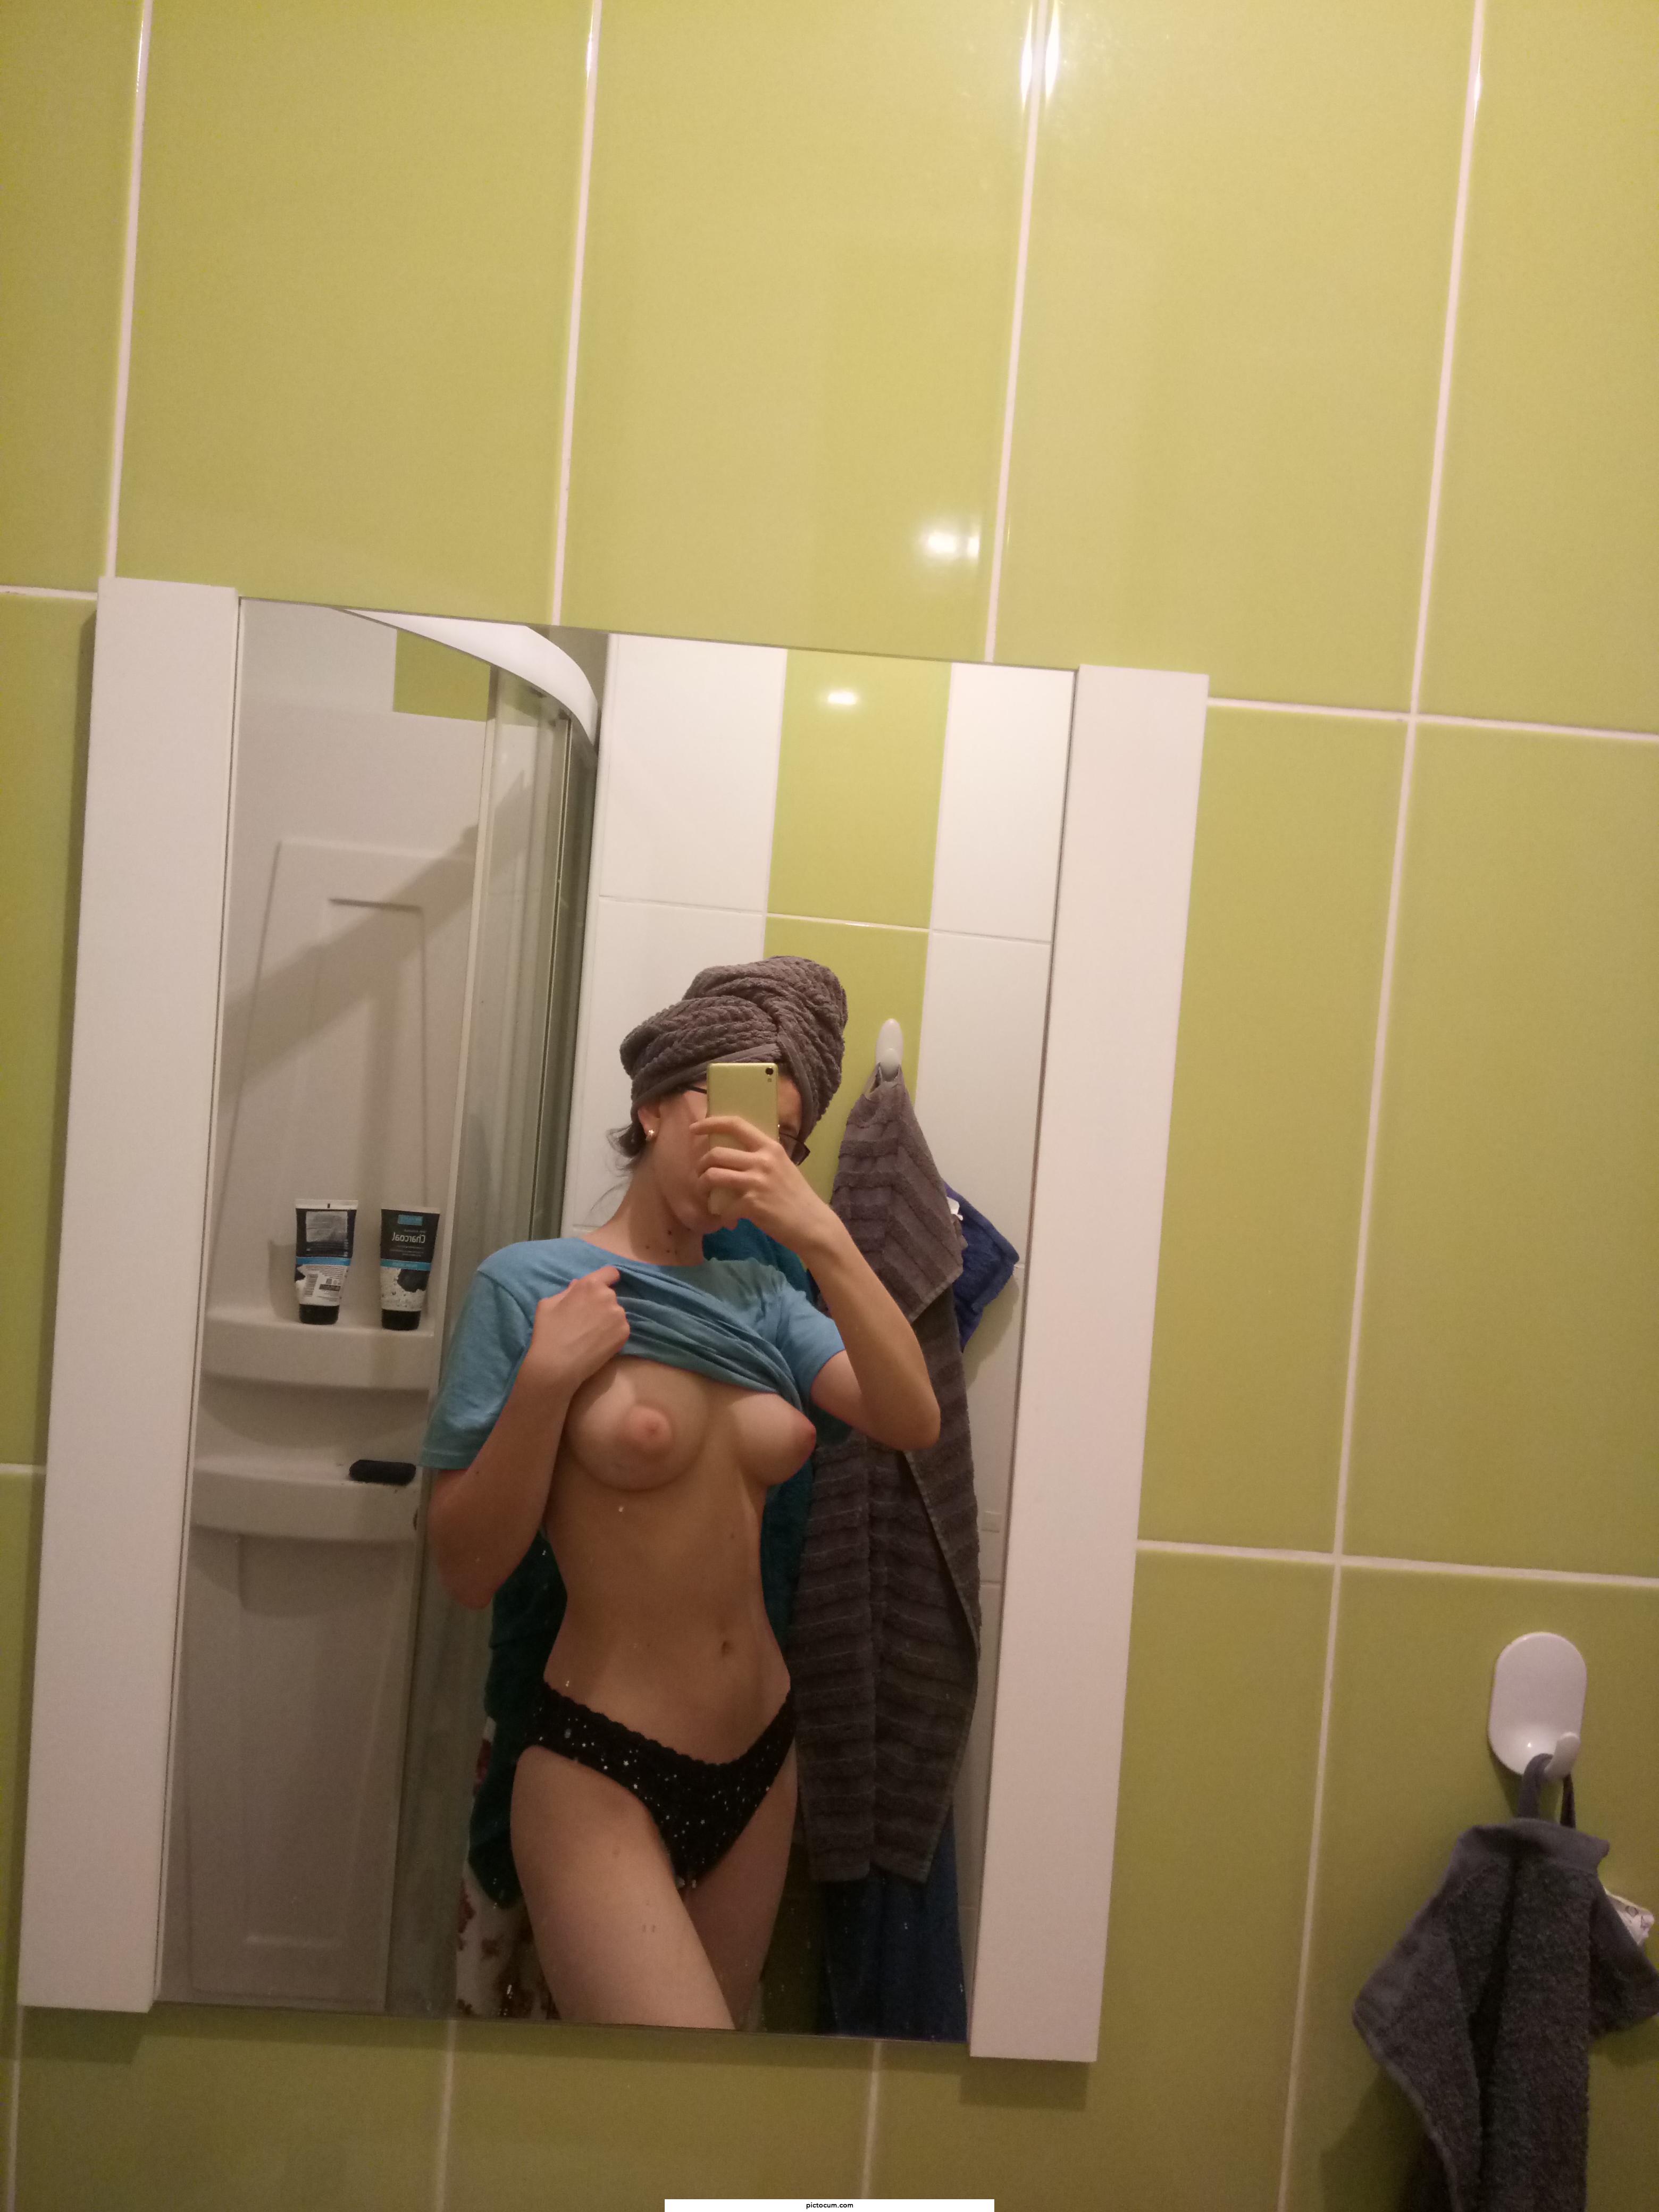 Out of shower and ready for a good dick. would you fuck me?